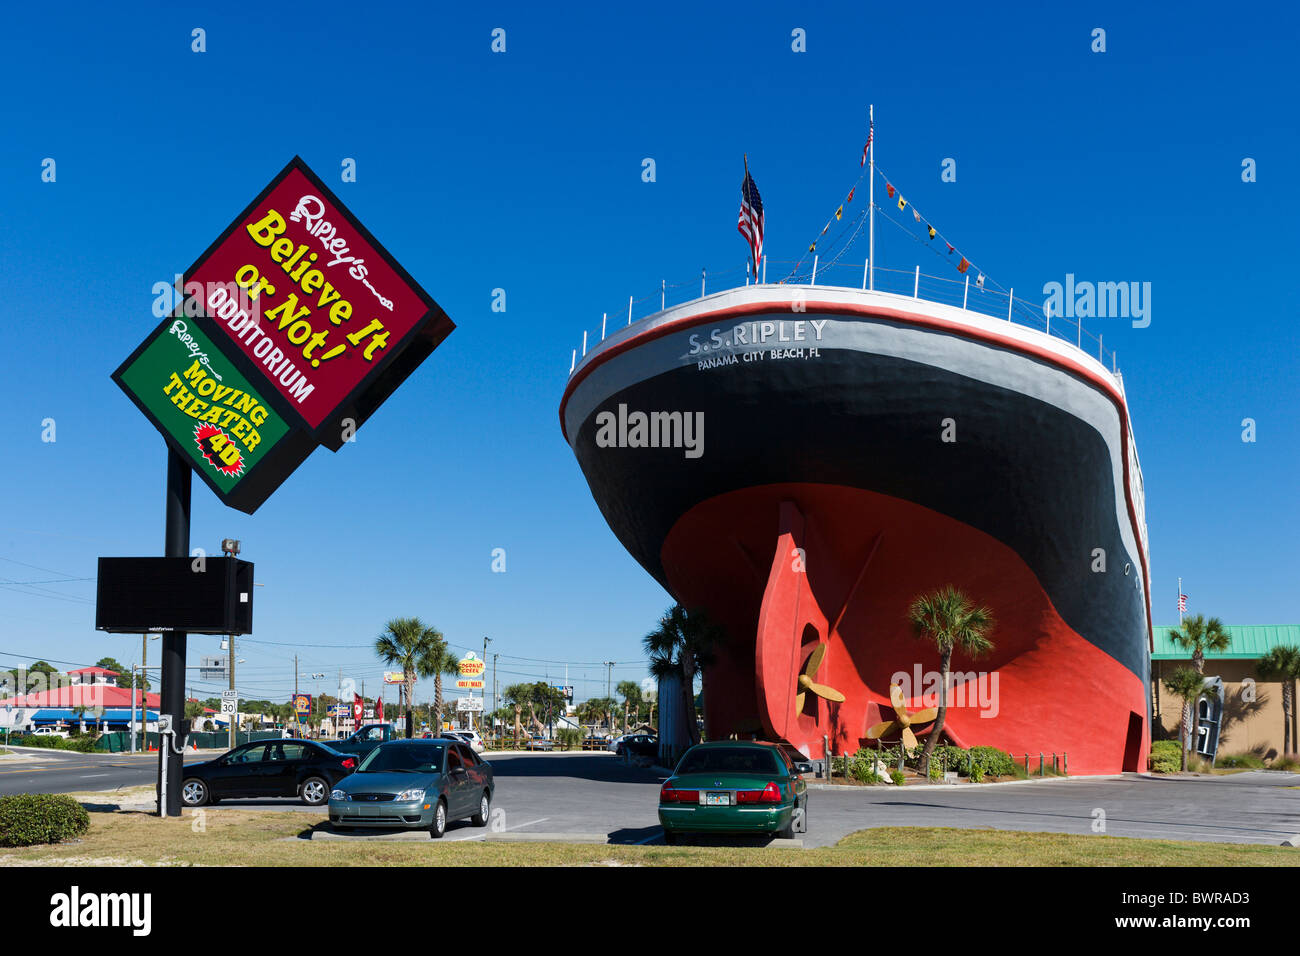 Ripley's Believe It or Not attraction in Panama City Beach, Gulf Coast, Florida, USA Stock Photo